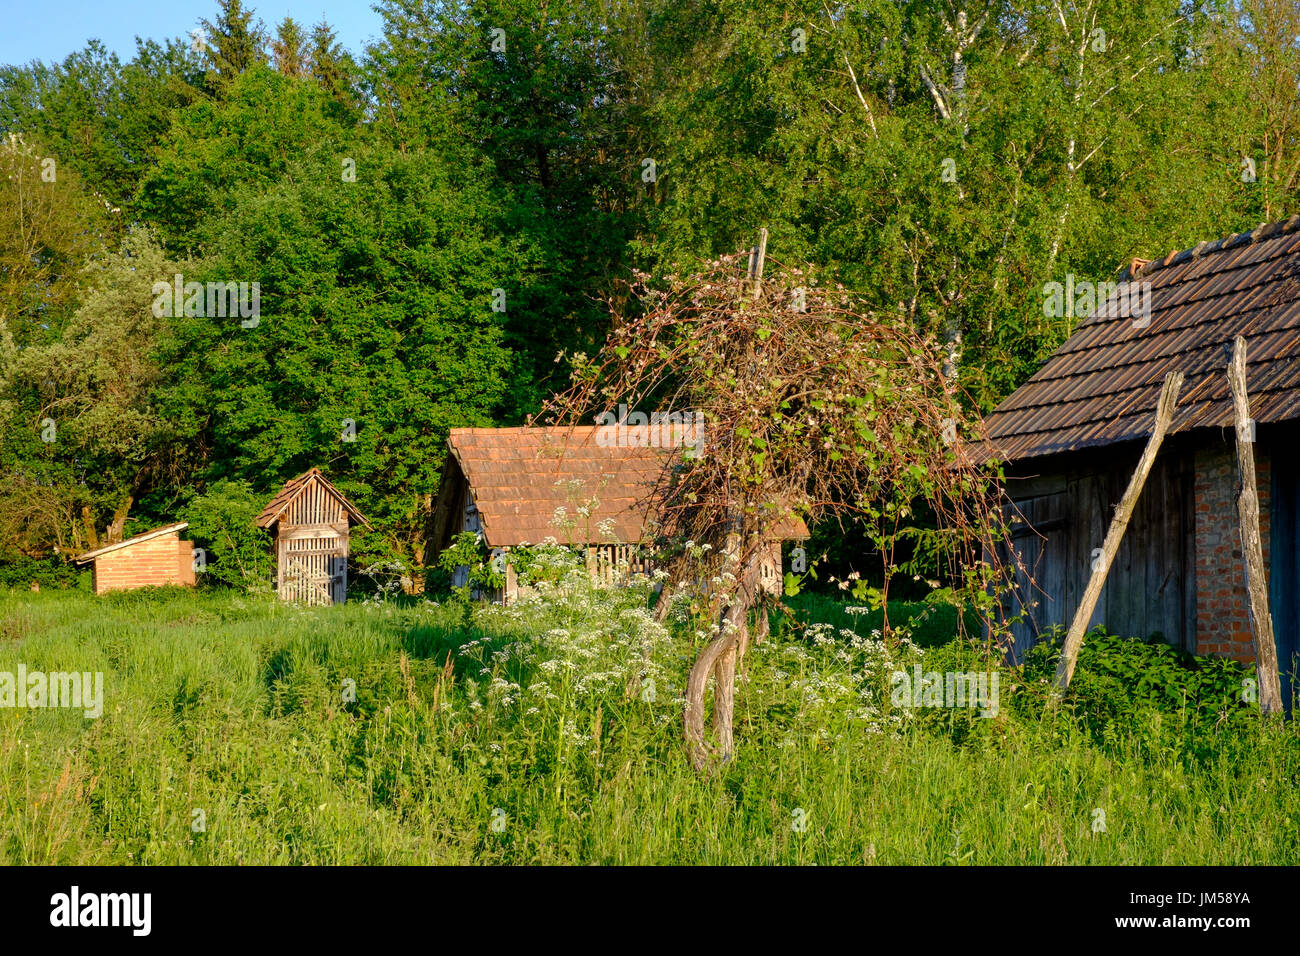 outbuildings in the garden of a typical rural village house in zala county hungary Stock Photo